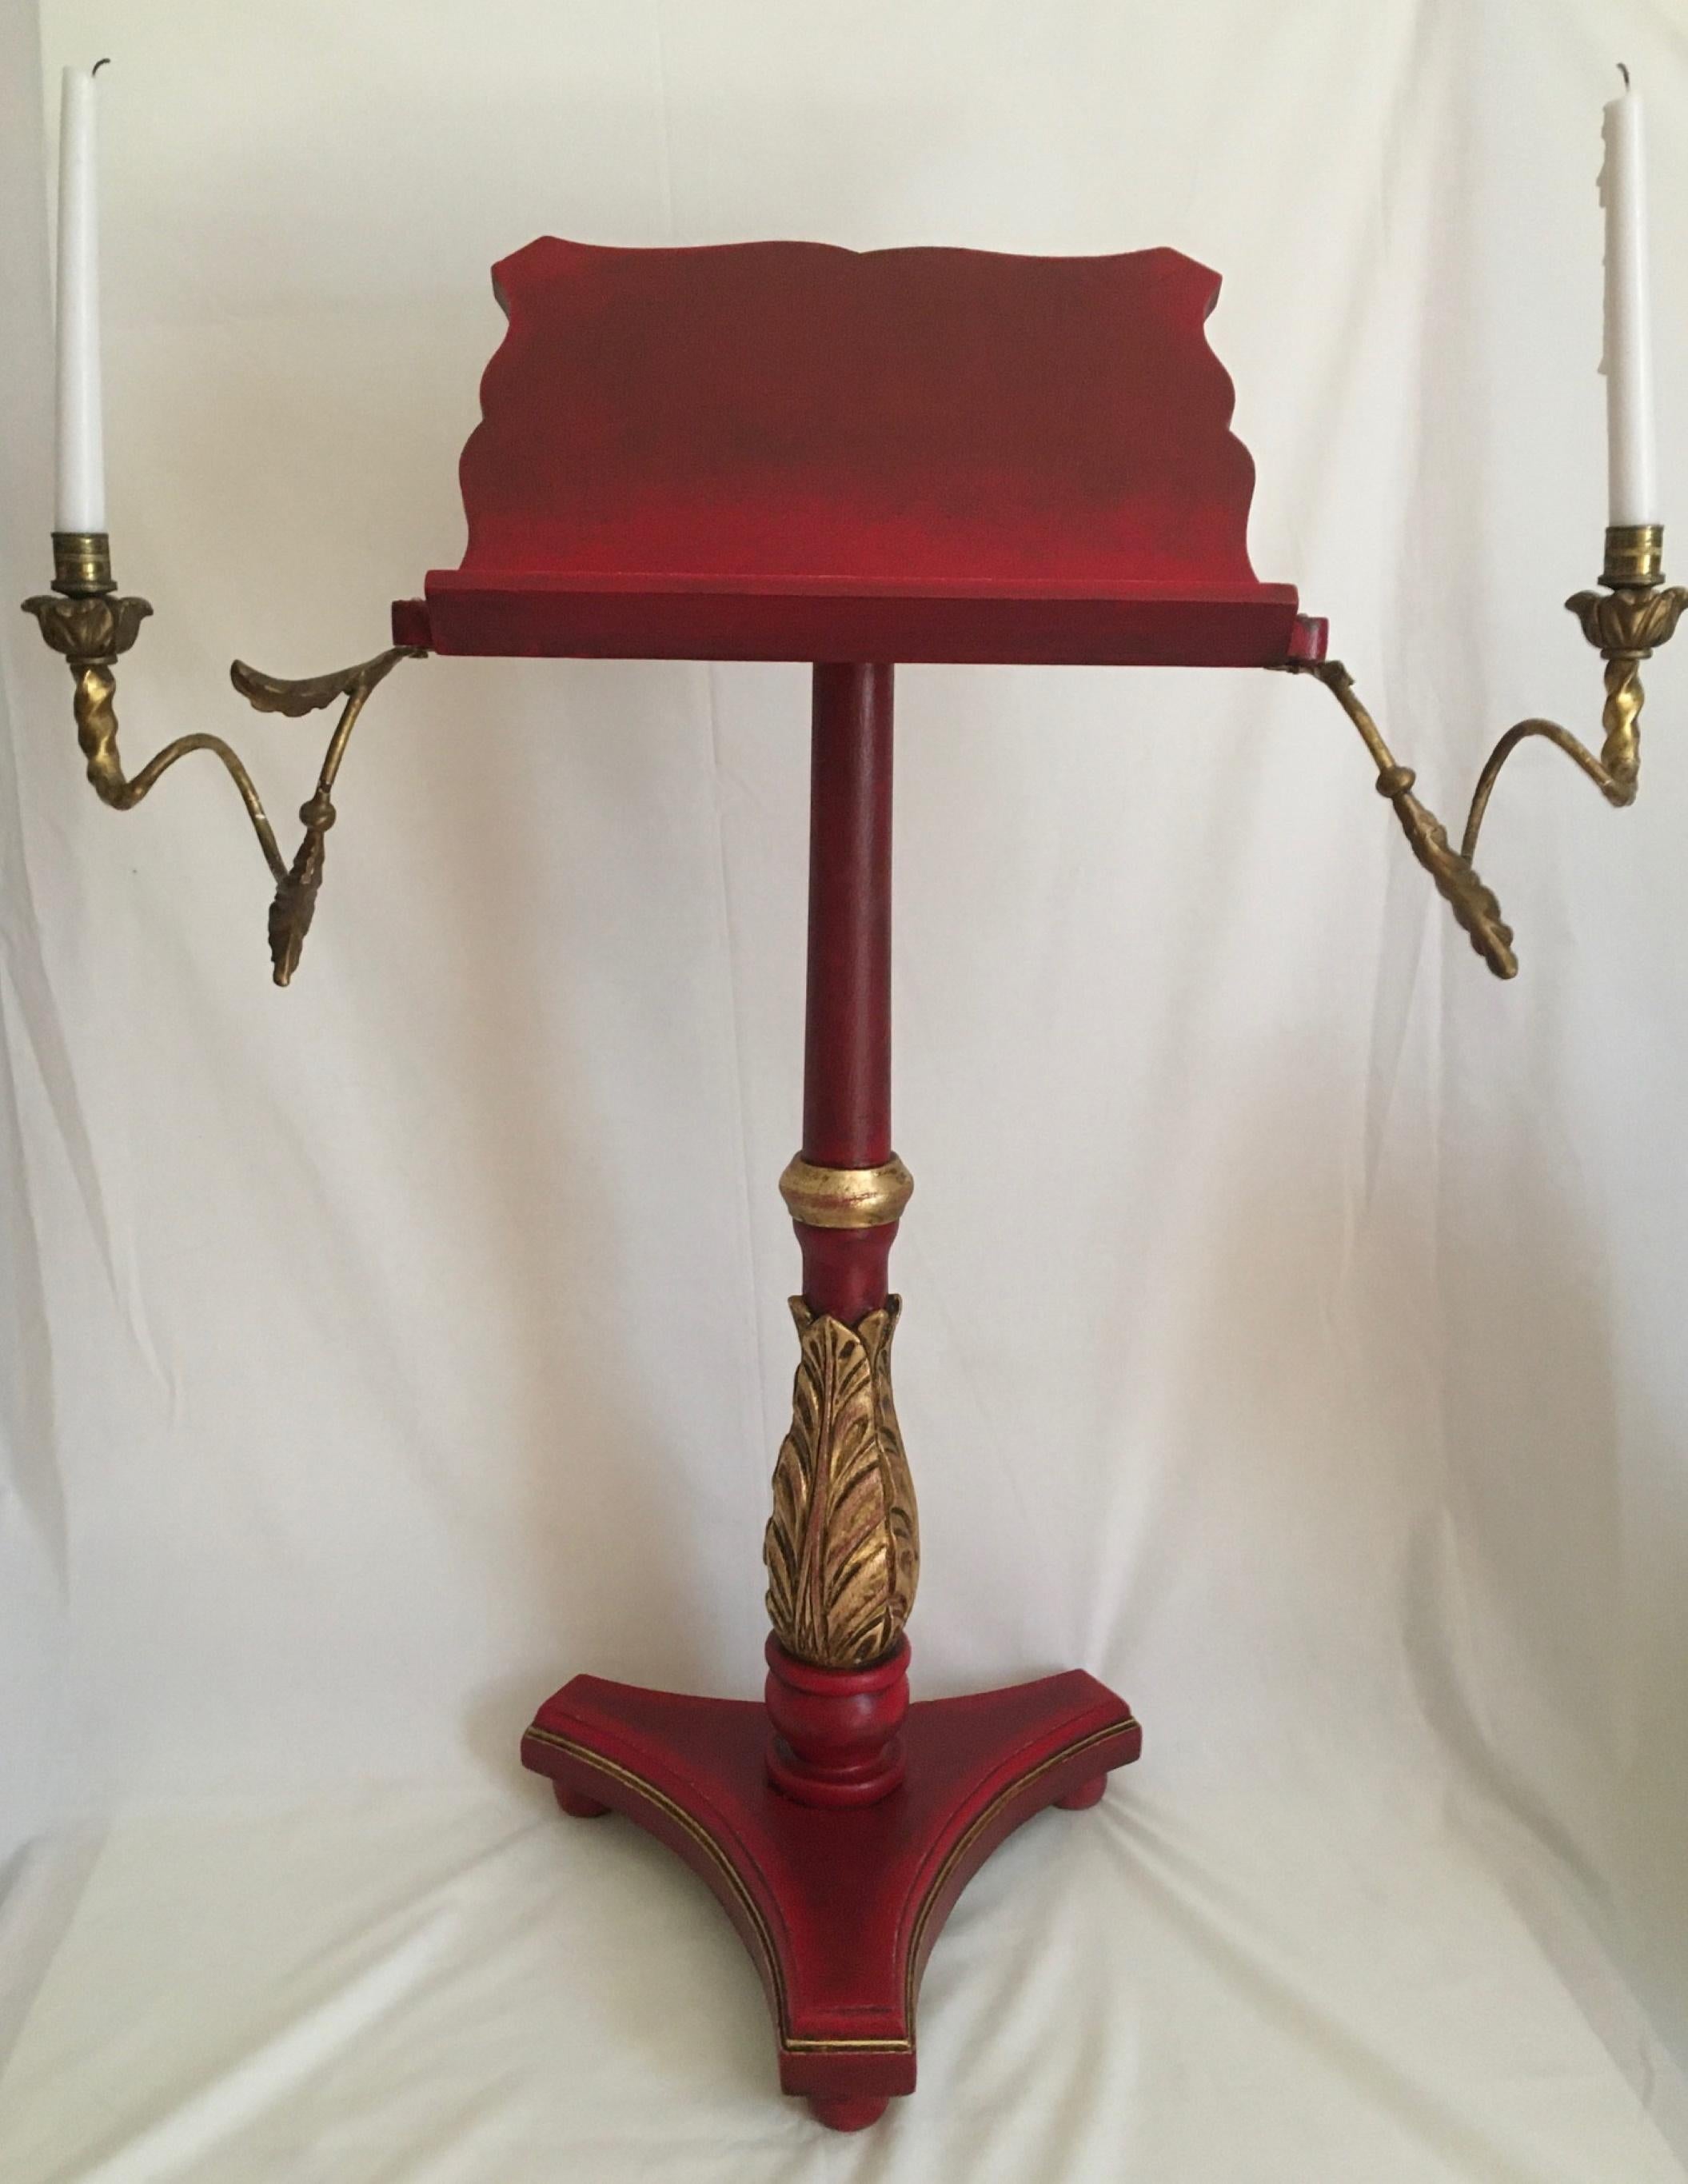 Vintage polychrome and gilded Venetian music stand.

Baroque style gilded, carved and polychrome music stand. The stand or lectern has a scalloped top over carved baluster column supported on a tripod base. Two wood carved and gilded candle